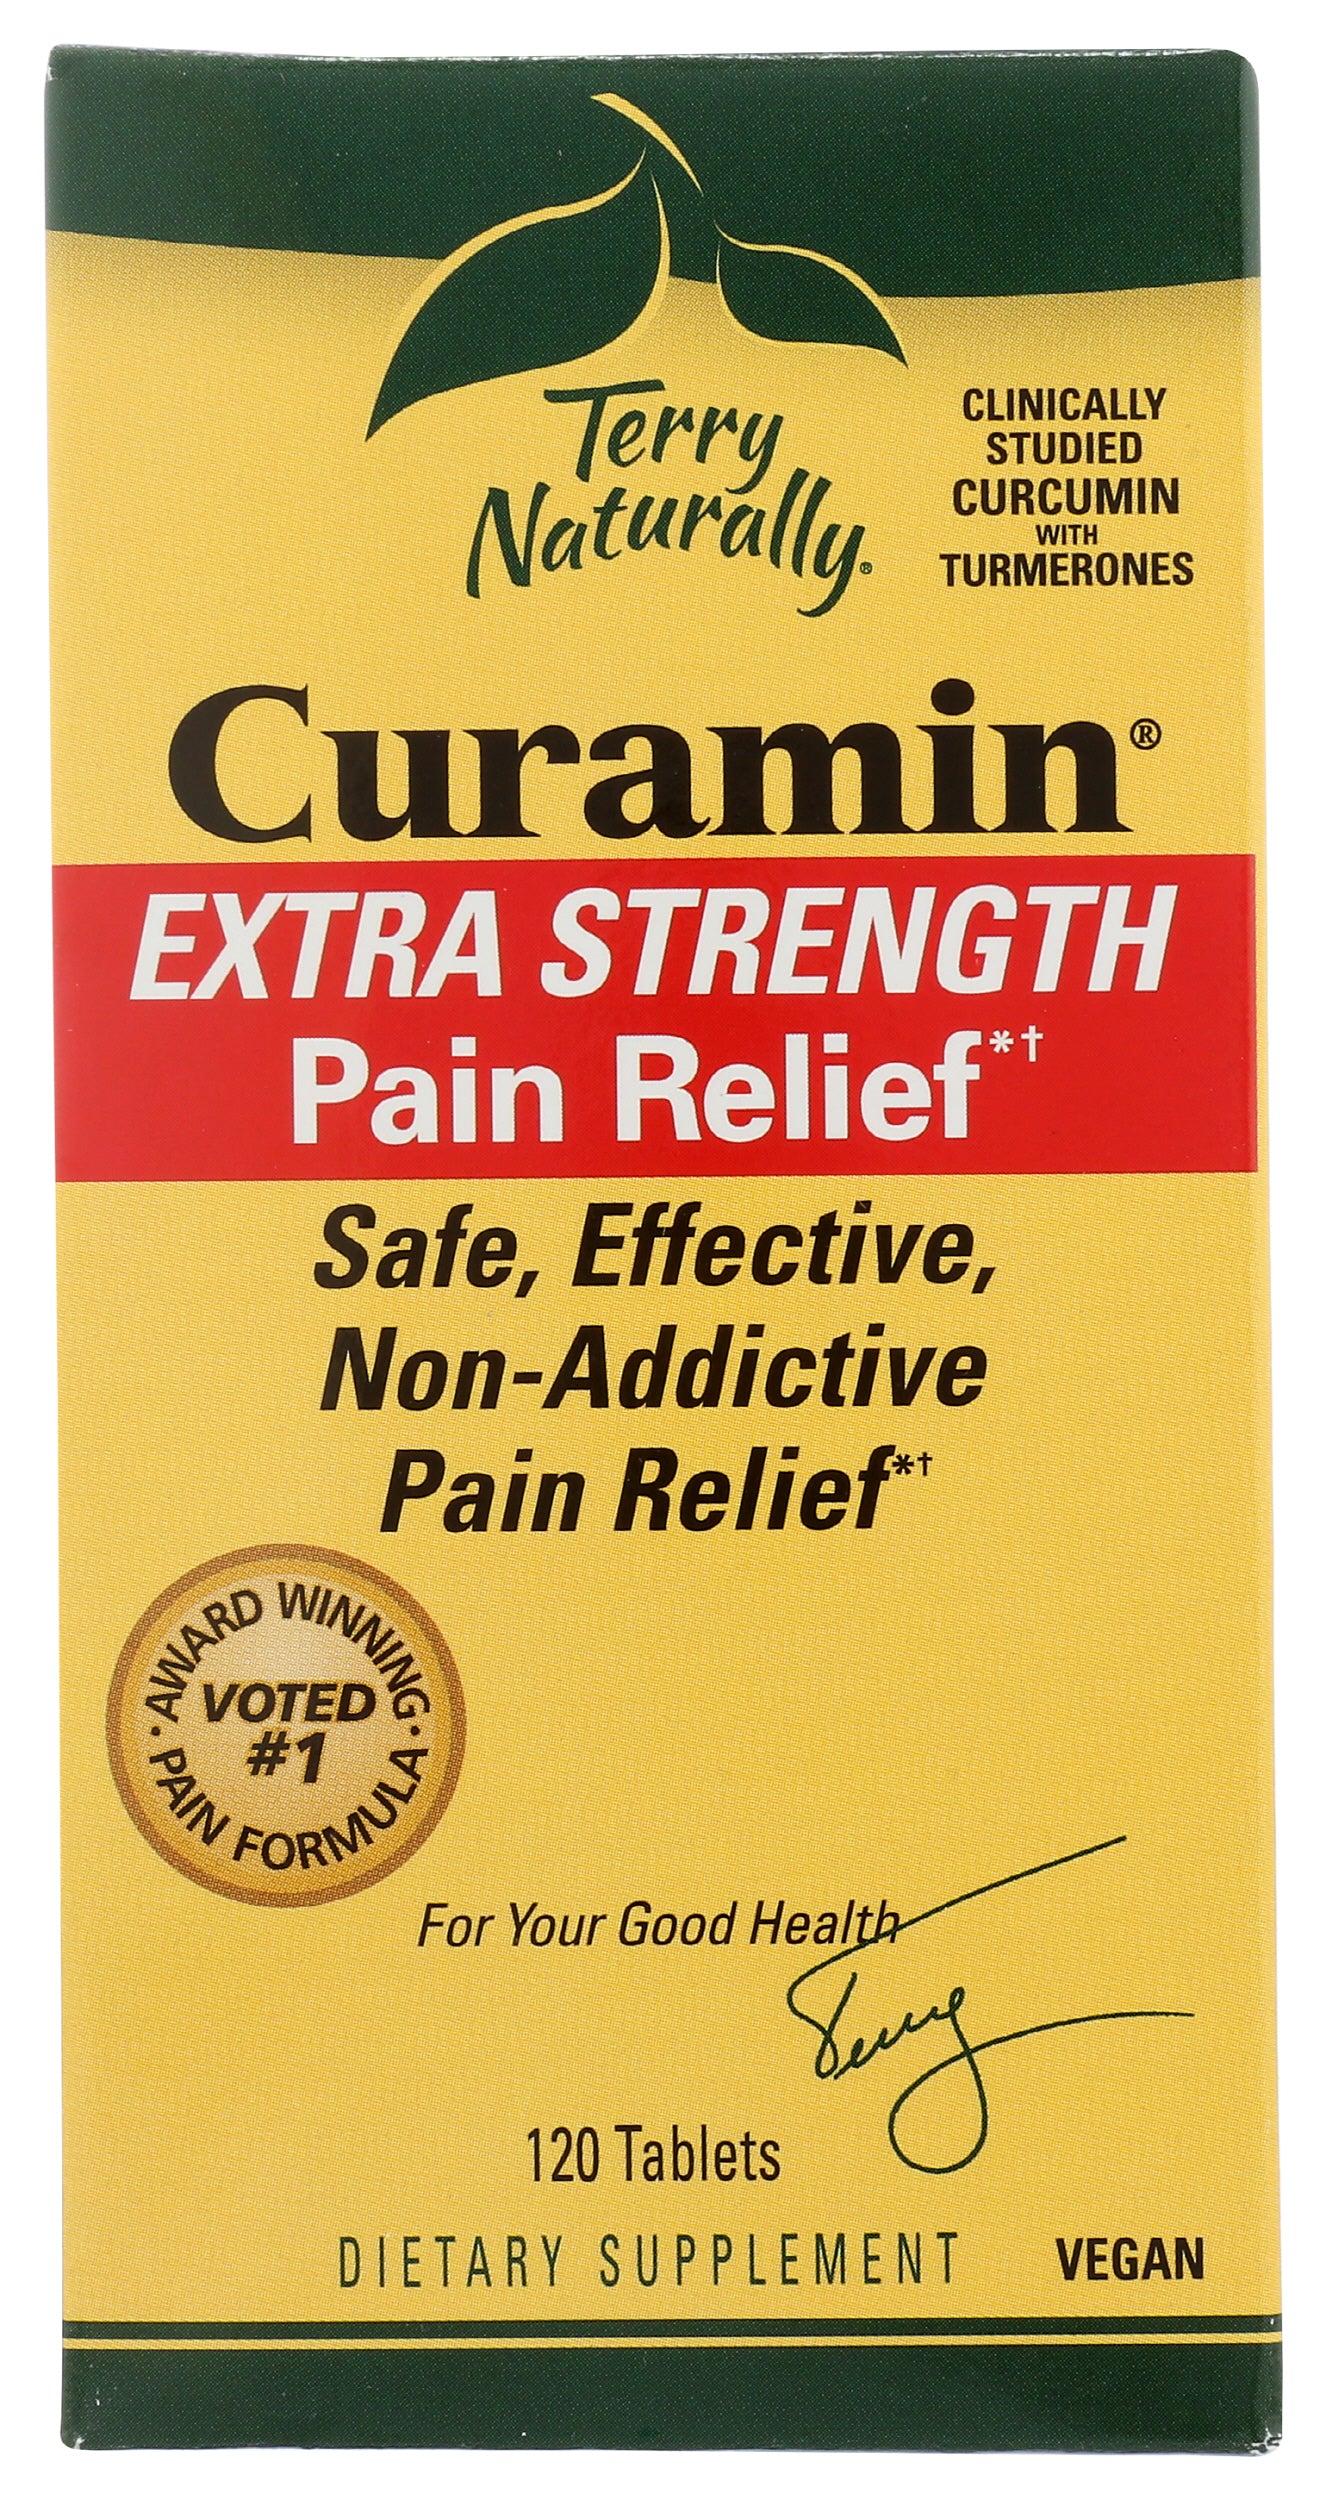 Terry Naturally Curamin Extra Strength Pain Relief 120 Tablets Front of Box